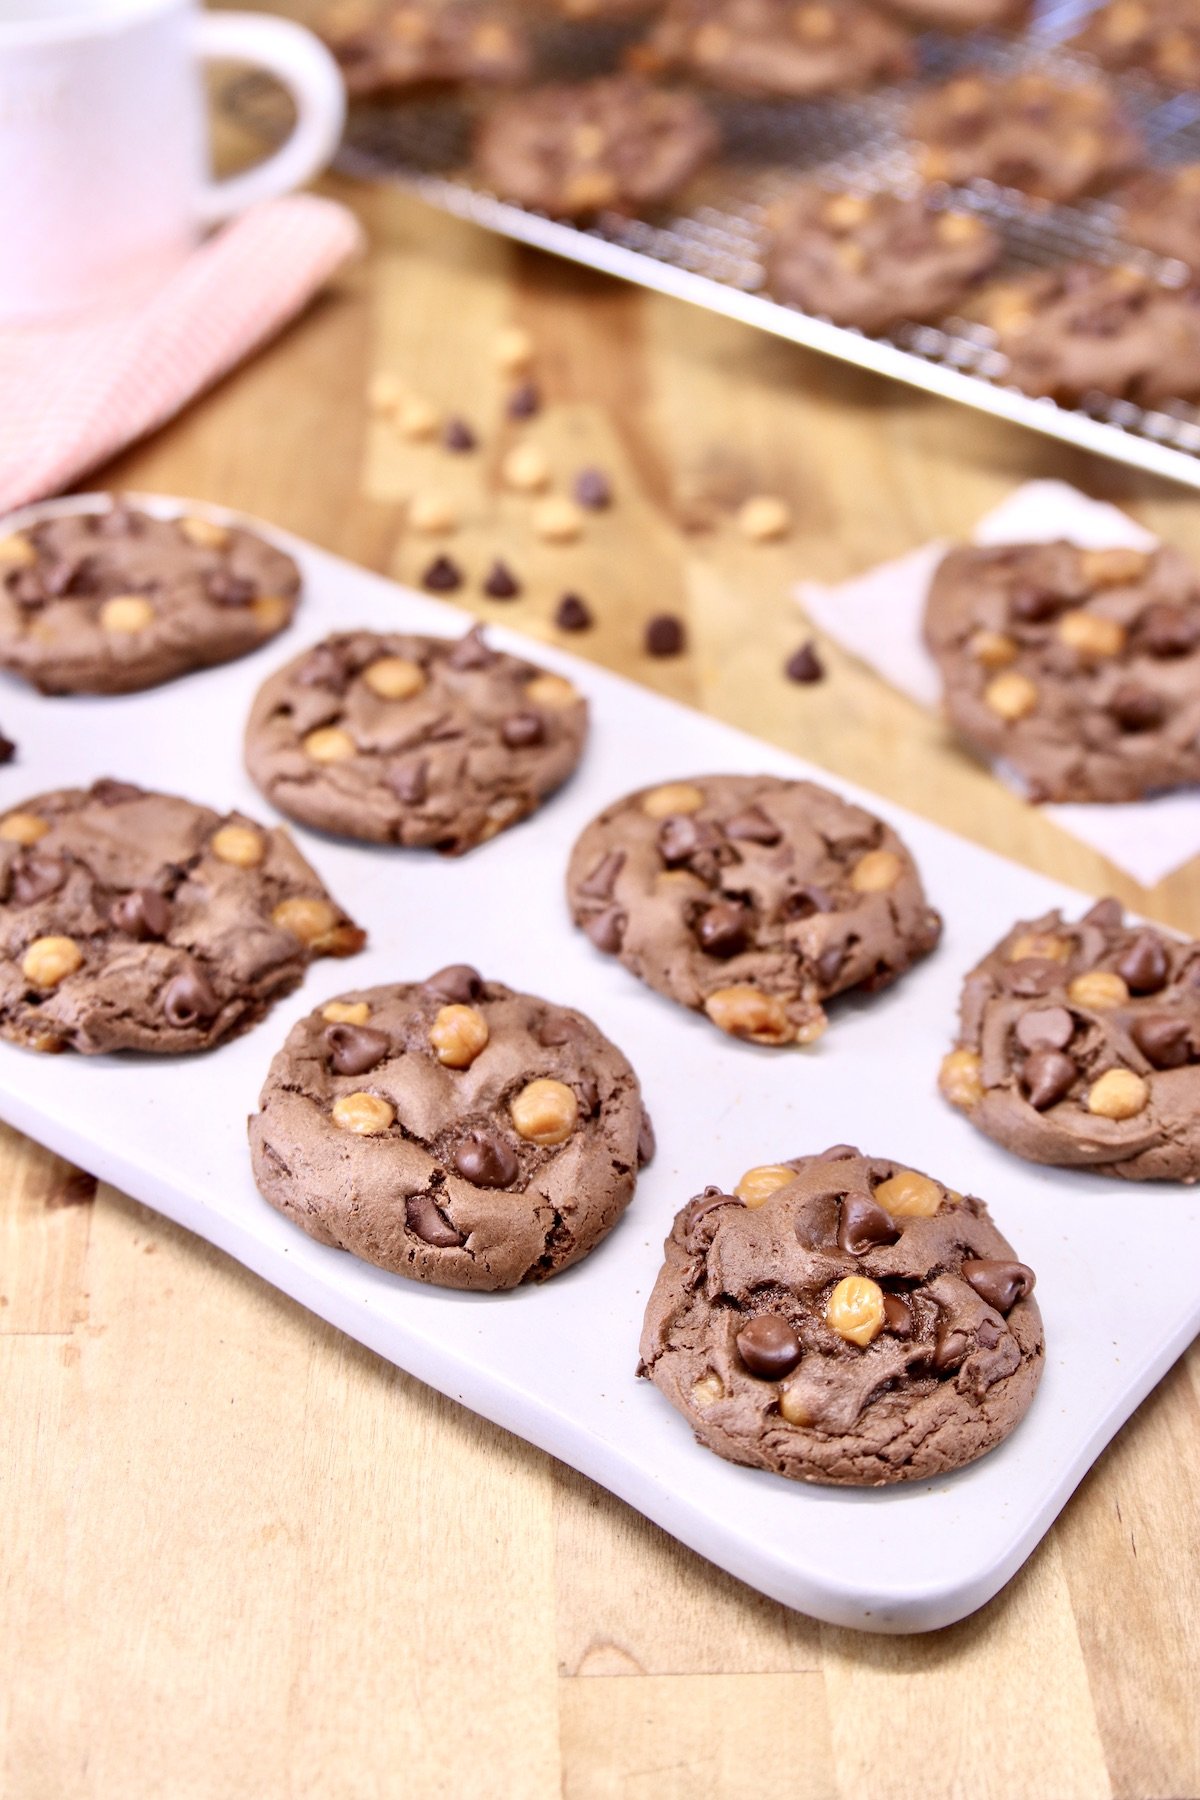 platter of chocolate cookies with caramel bits